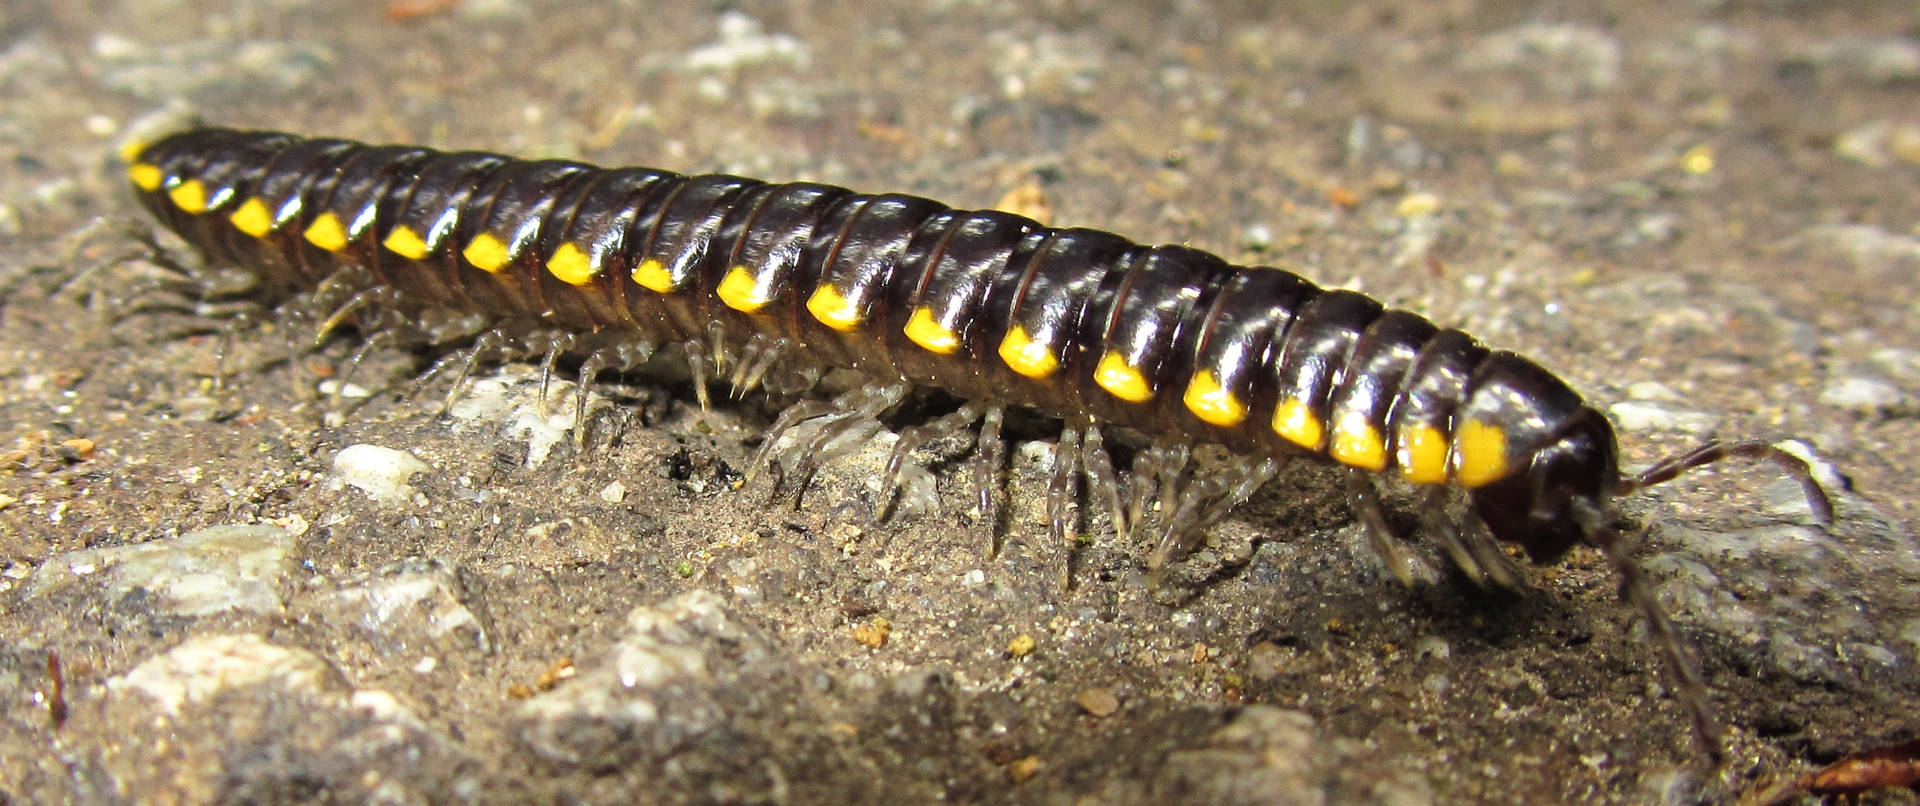 Centipede Black And Yellow On Concrete Wallpaper